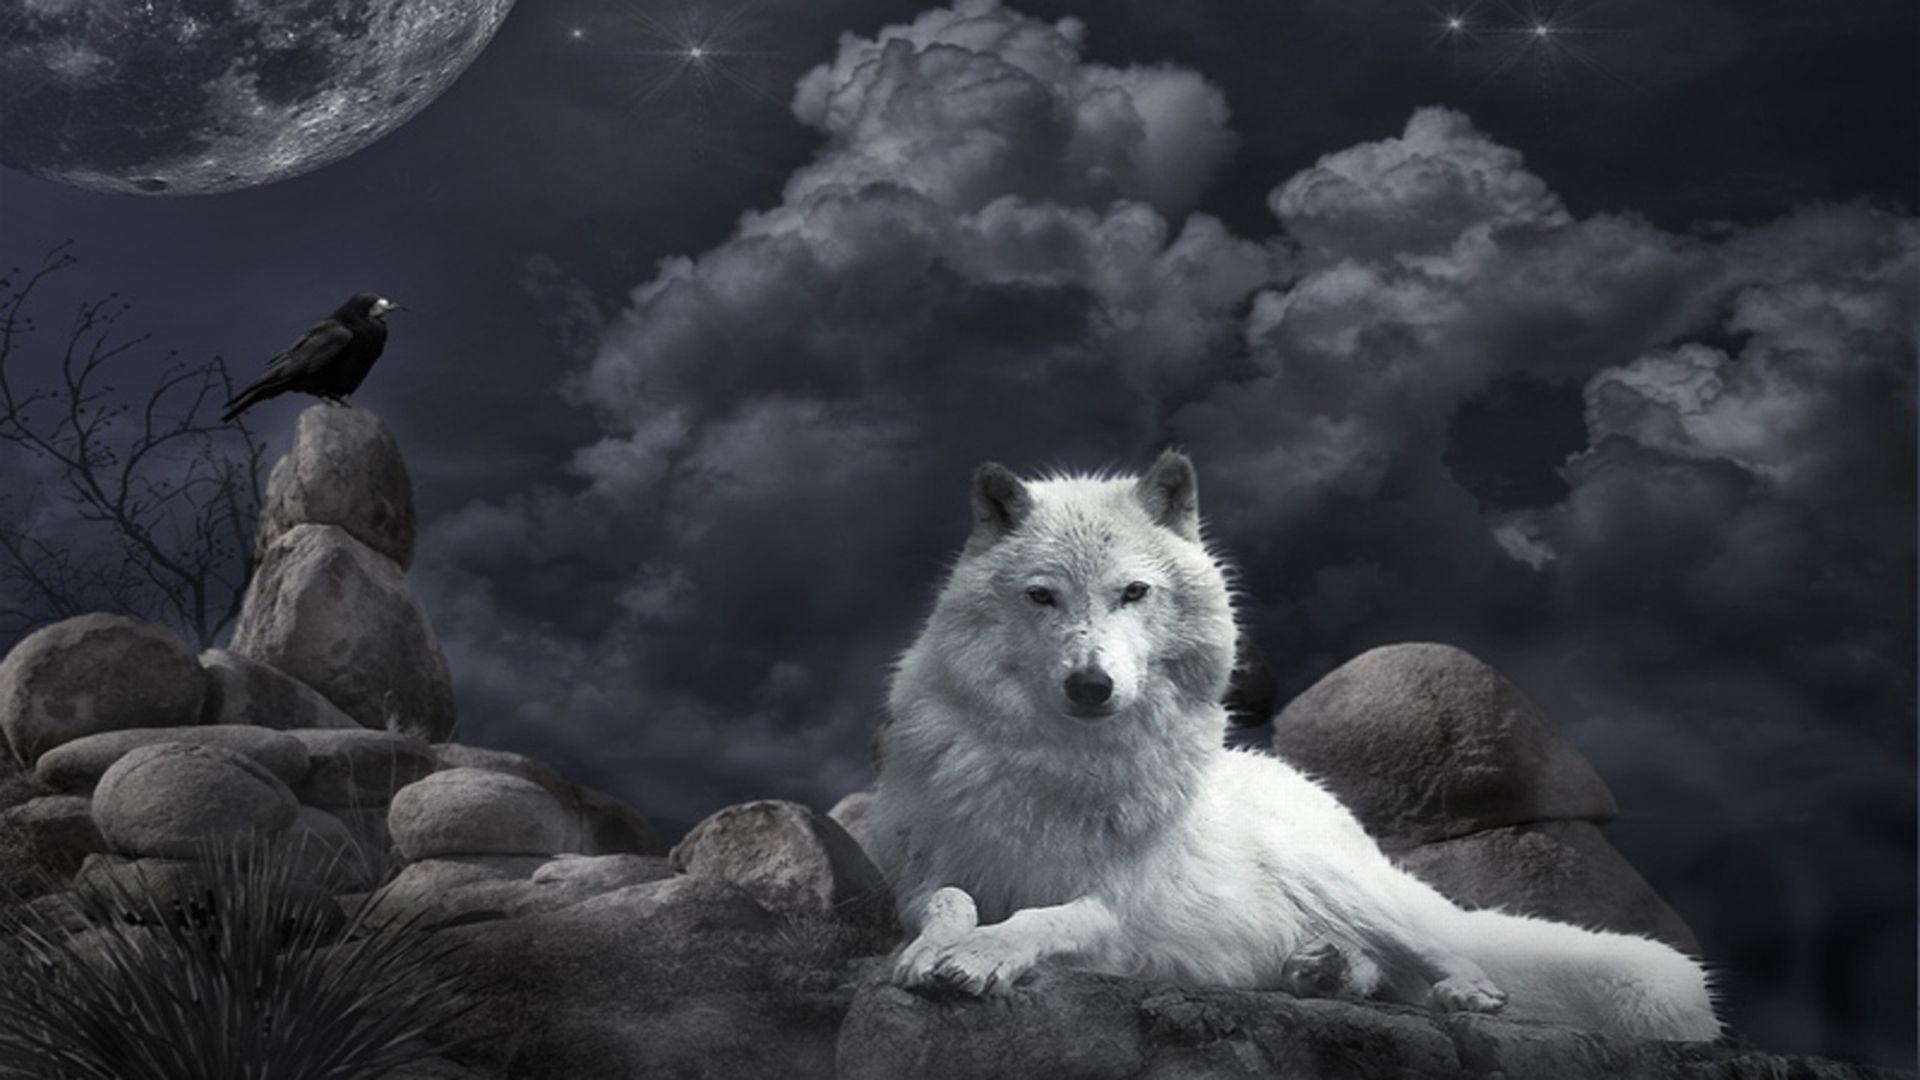 Wolf HD Image Photo Download